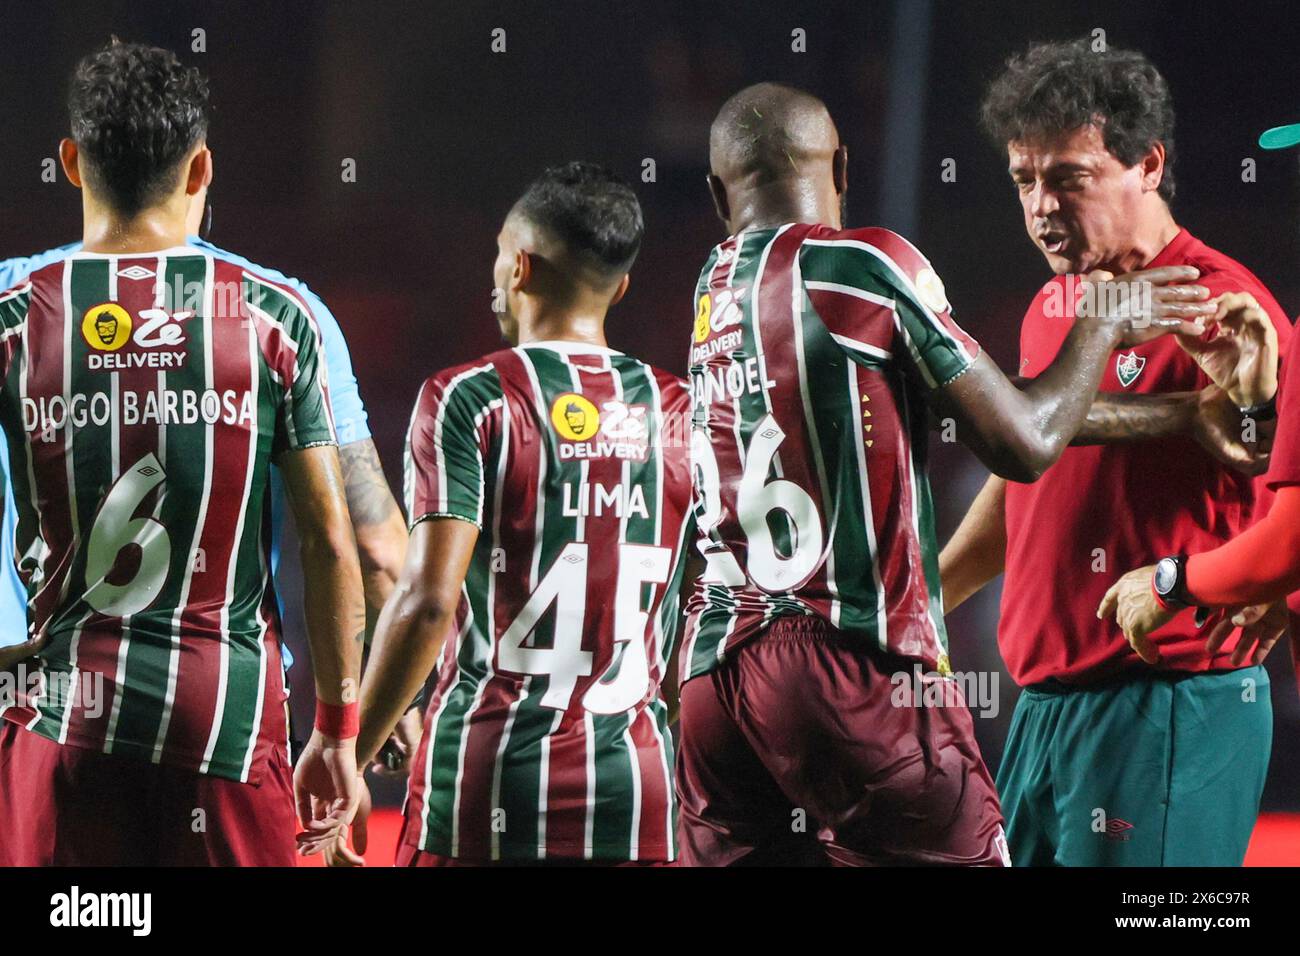 May 13, 2024, Sao Paulo, Sao Paulo, Brasil: Sao Paulo (SP), 05/13/2024 - CHAMPIONSHIP/FOOTBALL/SAO PAULO/FLUMINENSE - Coach Fernando Diniz, from Fluminense, gets involved in an argument with striker Luciano, from Sao Paulo, causing widespread confusion during the match between Sao Paulo and Fluminense, valid for the 6th round of the Brazilian Championship Series A 2024, held at the Morumbis stadium, in the capital of Sao Paulo, on Monday night (13). Referee Anderson Daronco sent off the coach of the Rio club and penalized the home team's striker with a yellow card. Sao Paulo won the match 2-1. Stock Photo